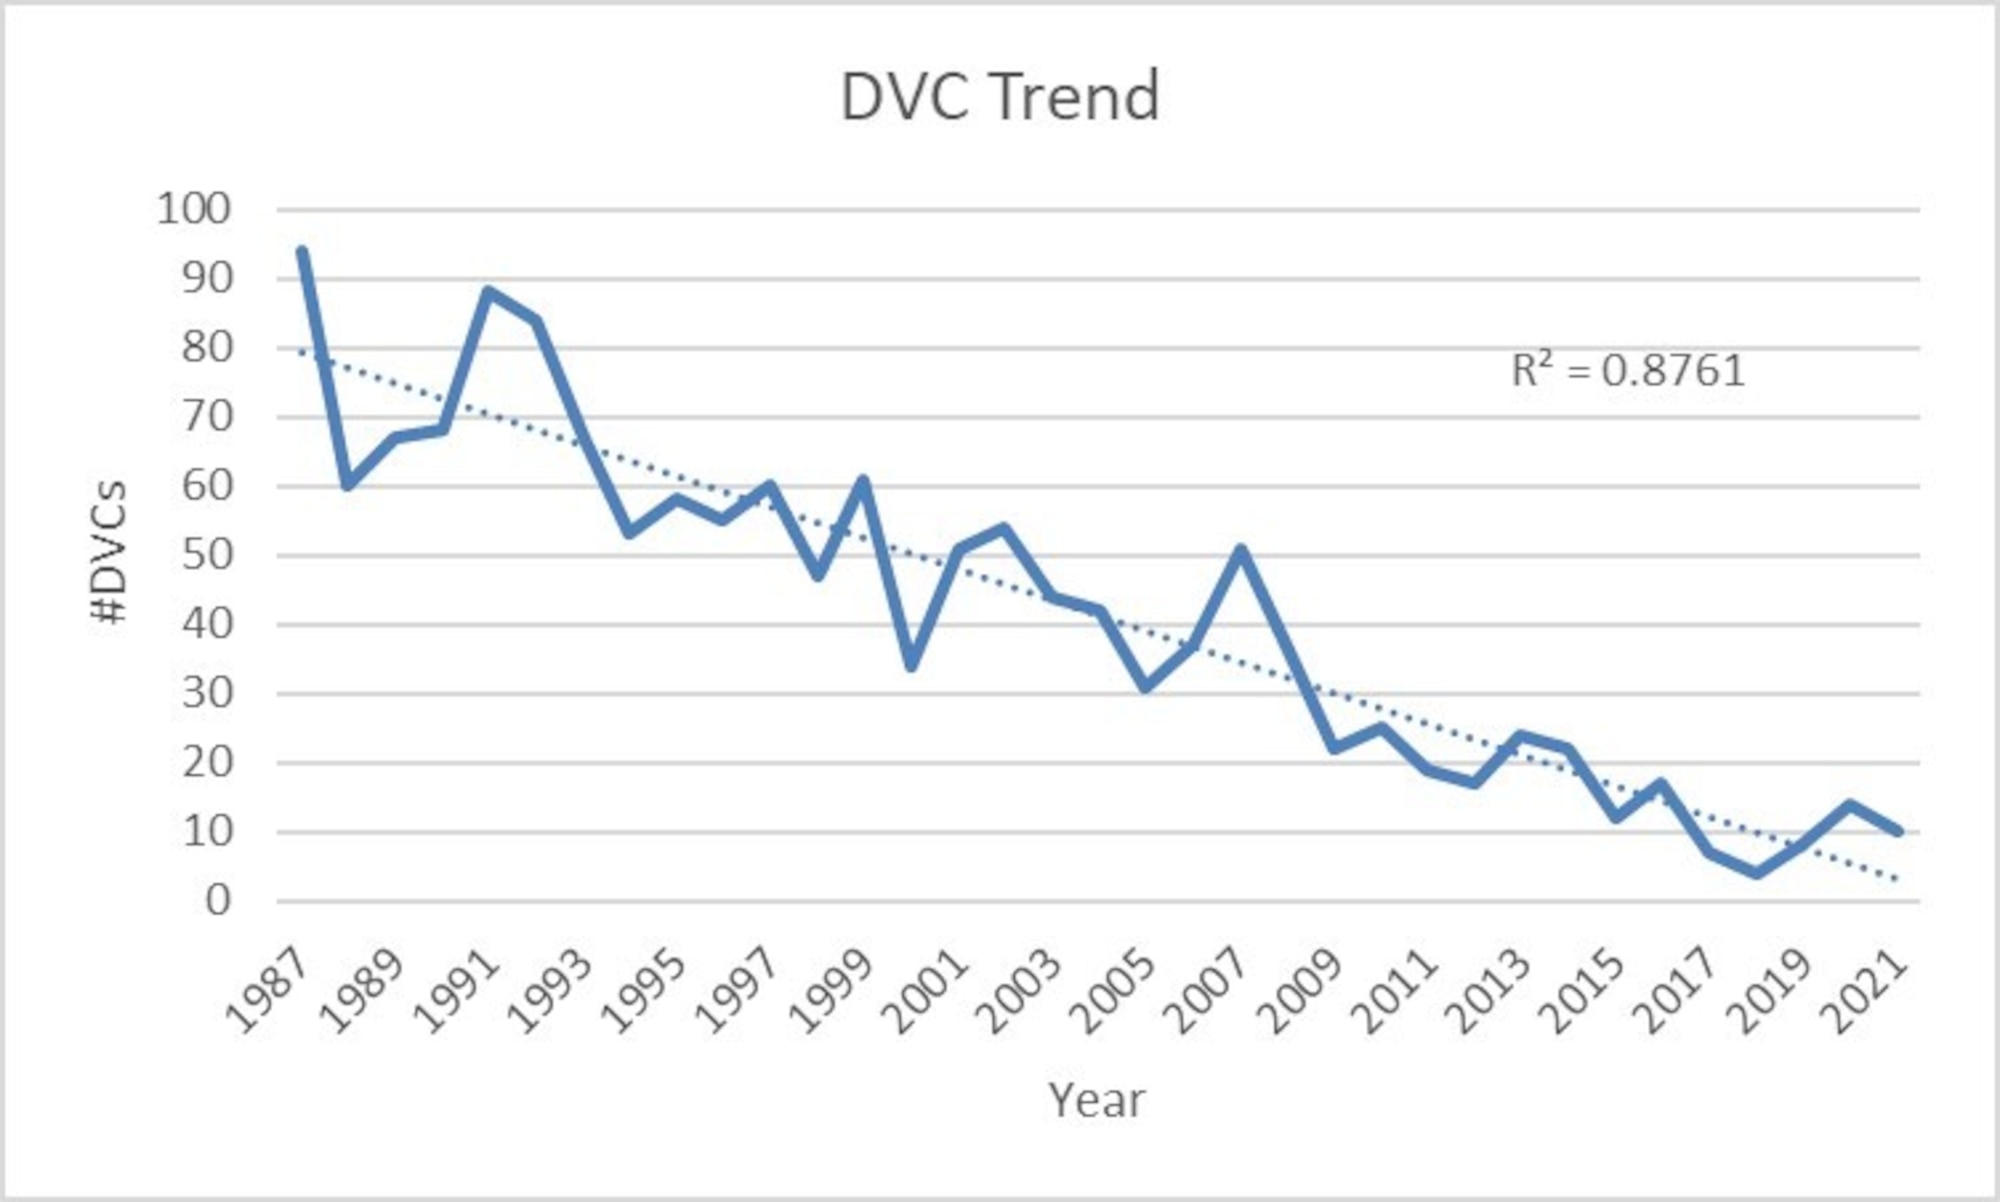 Deer vehicle collision, or DVC, data has been collected on Arnold Air Force Base since 1987. While the risk has declined significantly over the years, the hazard of driving on roads in the presence of deer still remains. (Graphic contributed)